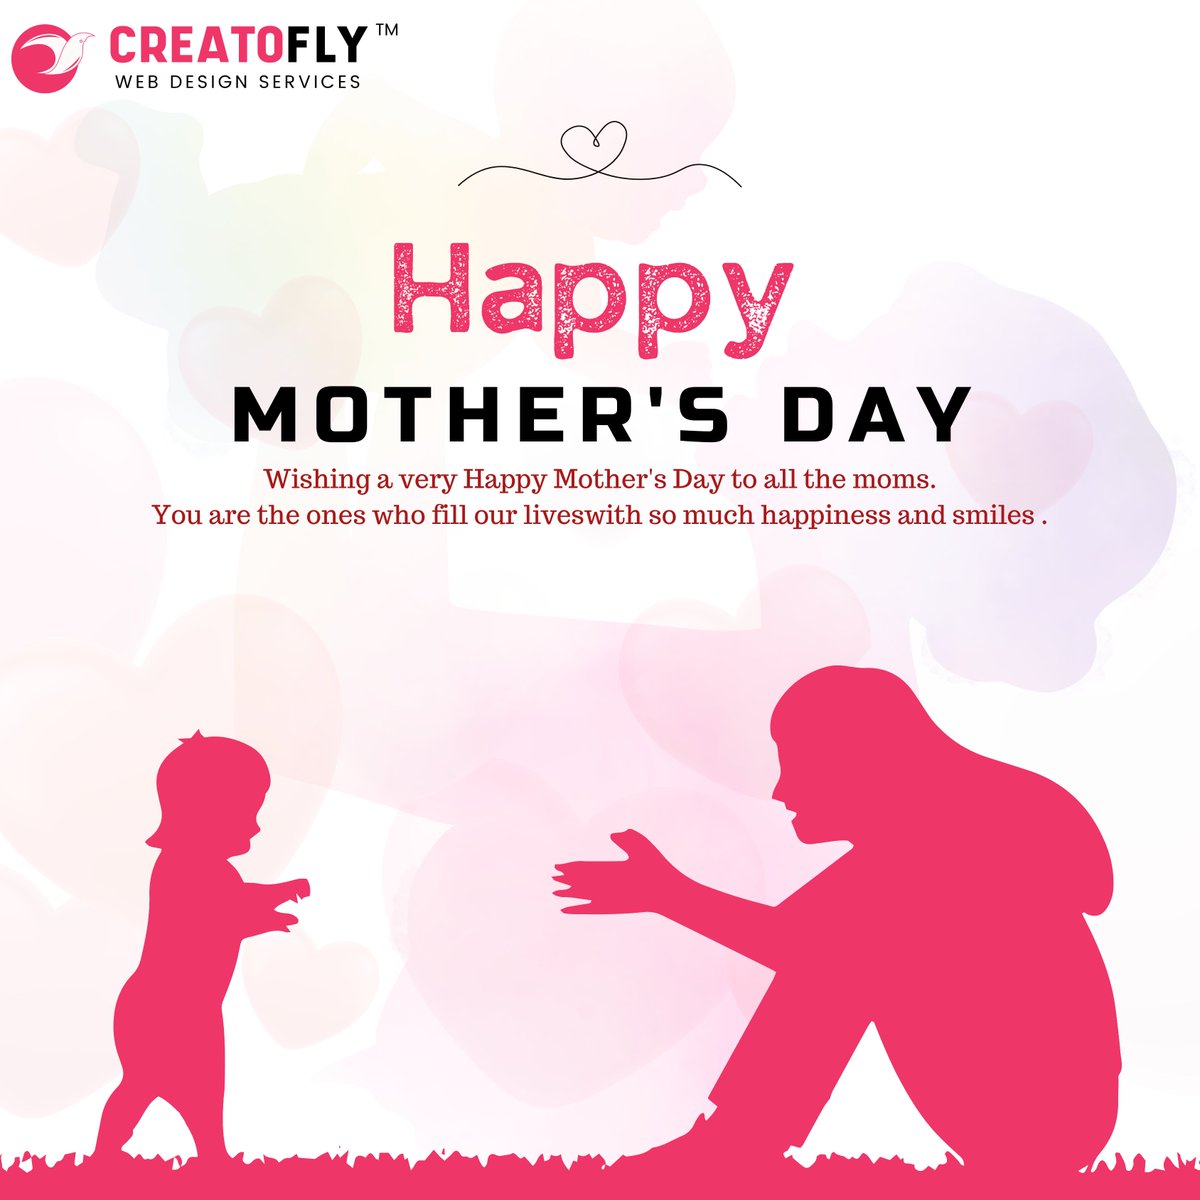 Happy Mother's day

Wishing a very Happy Mother's Day to all the moms.
You are the ones who fill our liveswith so much happiness and smiles .

#creatofly #happymotherday #viralpost #trendingpost #latestpost #motherlove